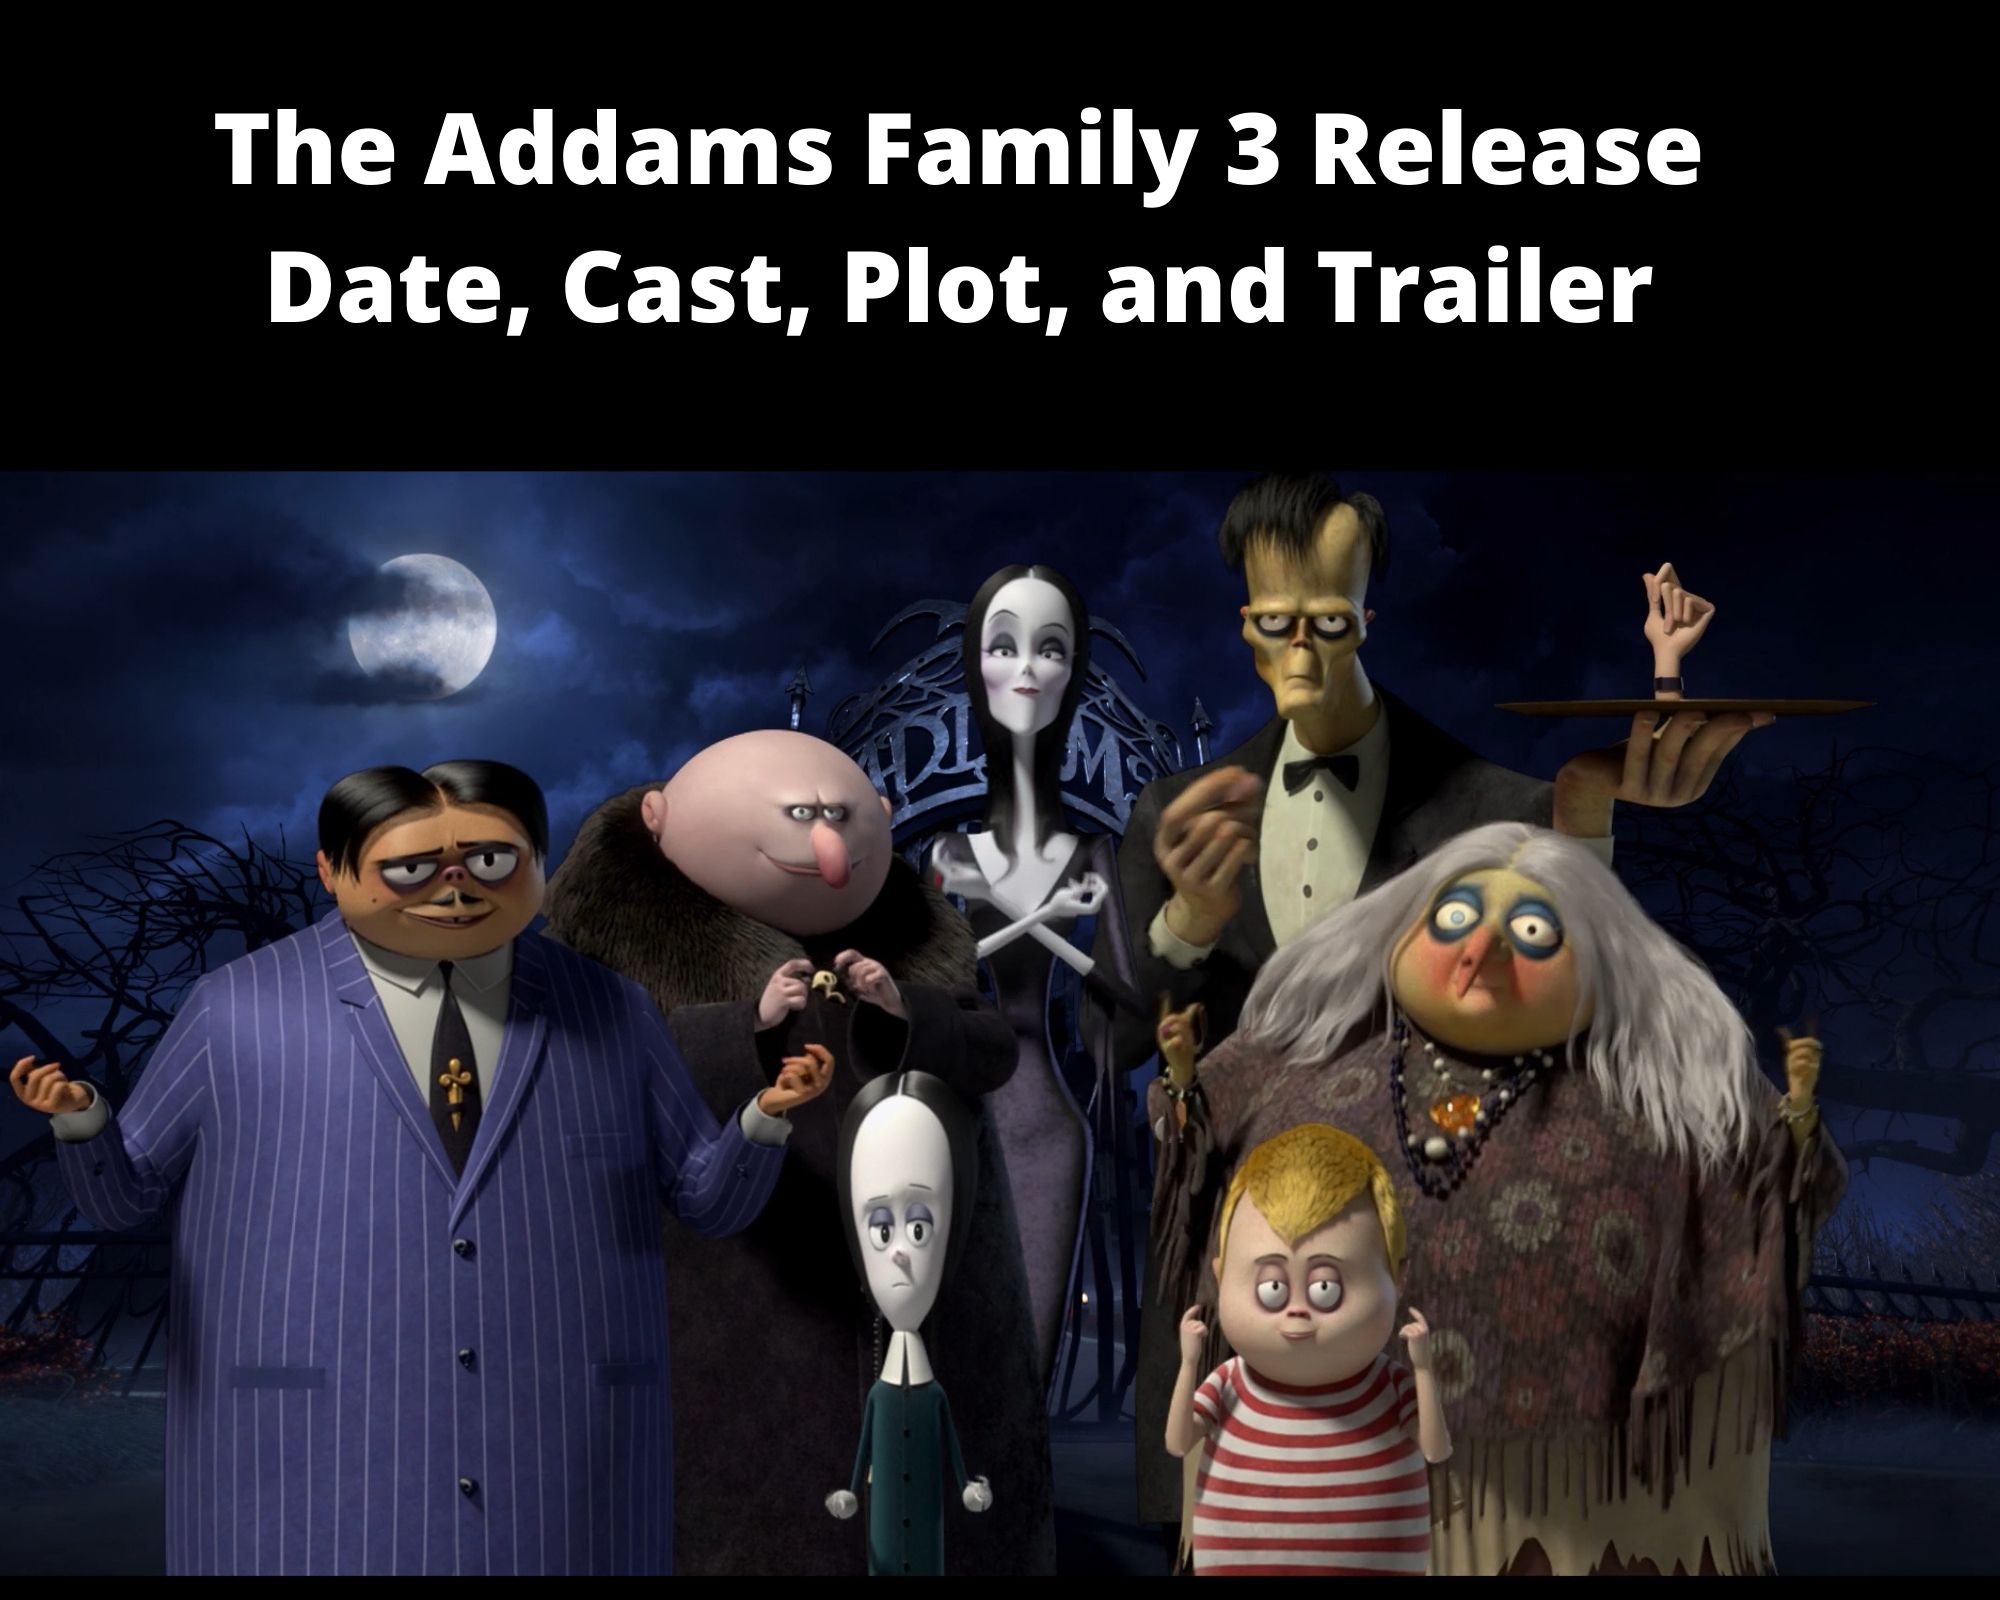 The Addams Family 3